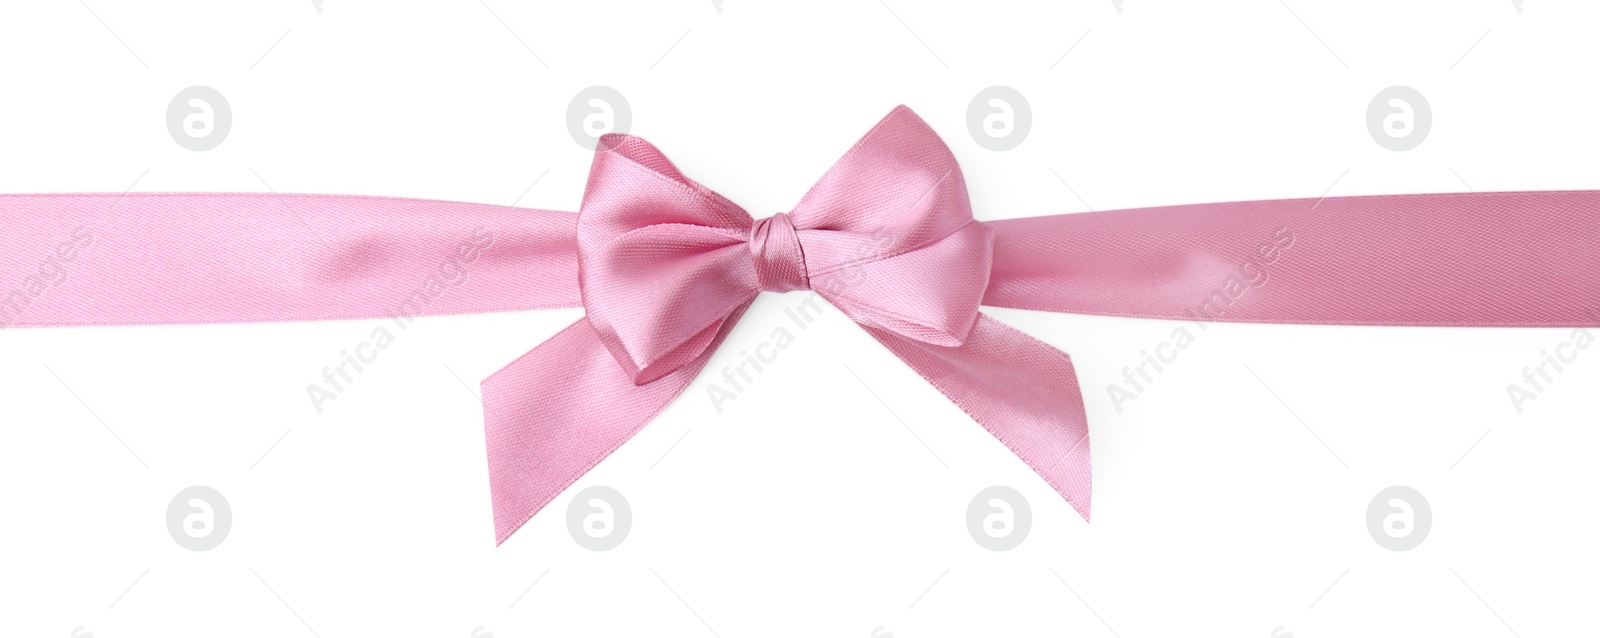 Photo of Pink satin ribbon with bow on white background, top view